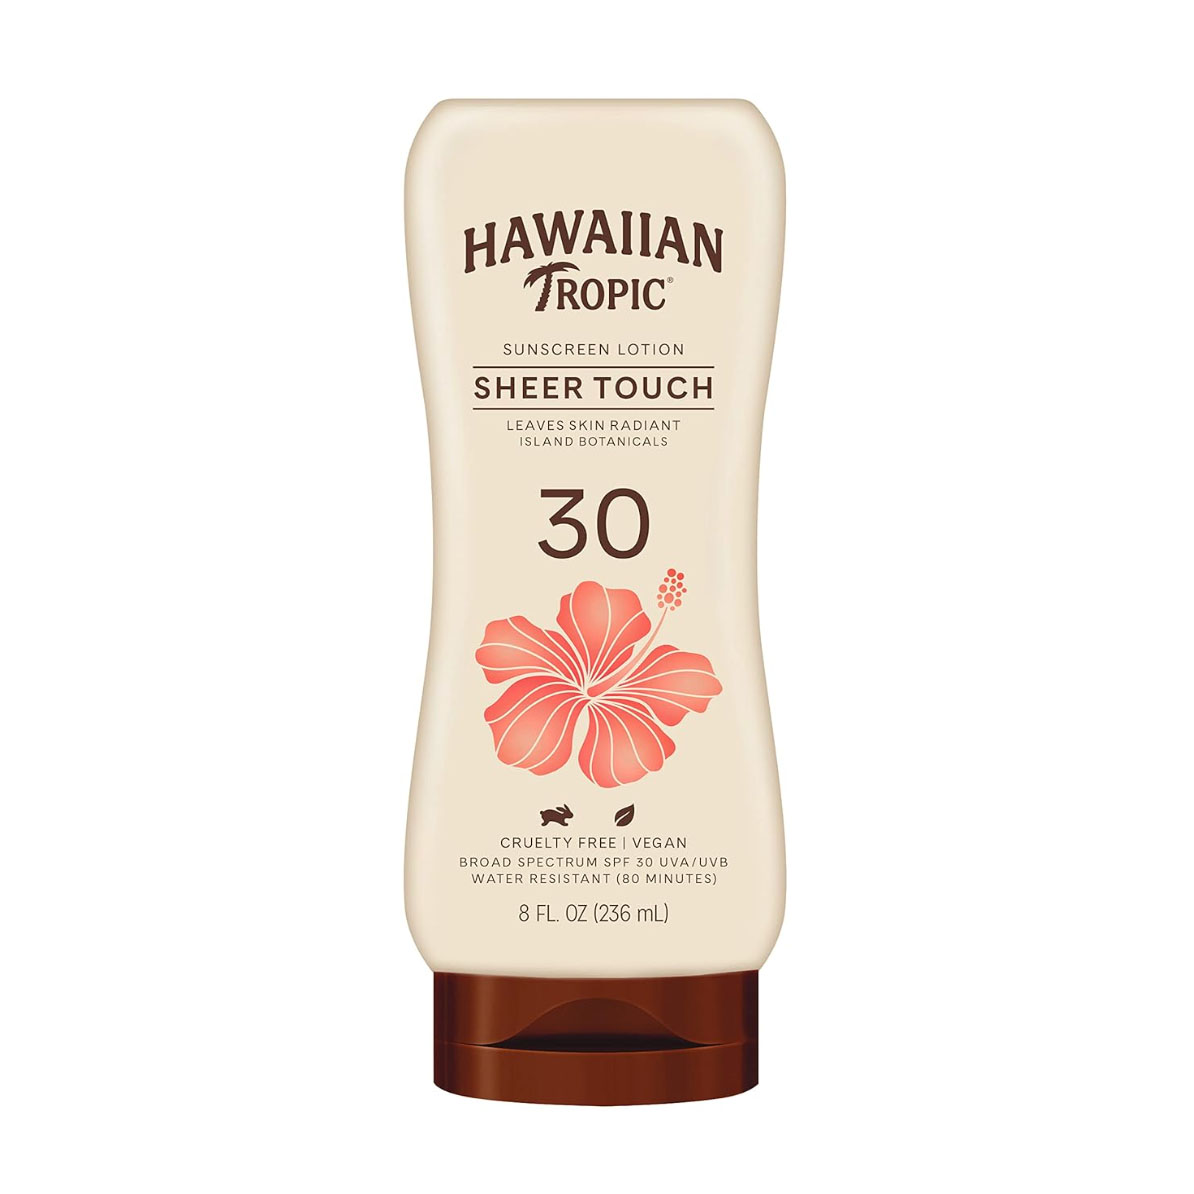 Hawaiian Tropic Sheer Touch Lotion SPF 30 in brown bottle